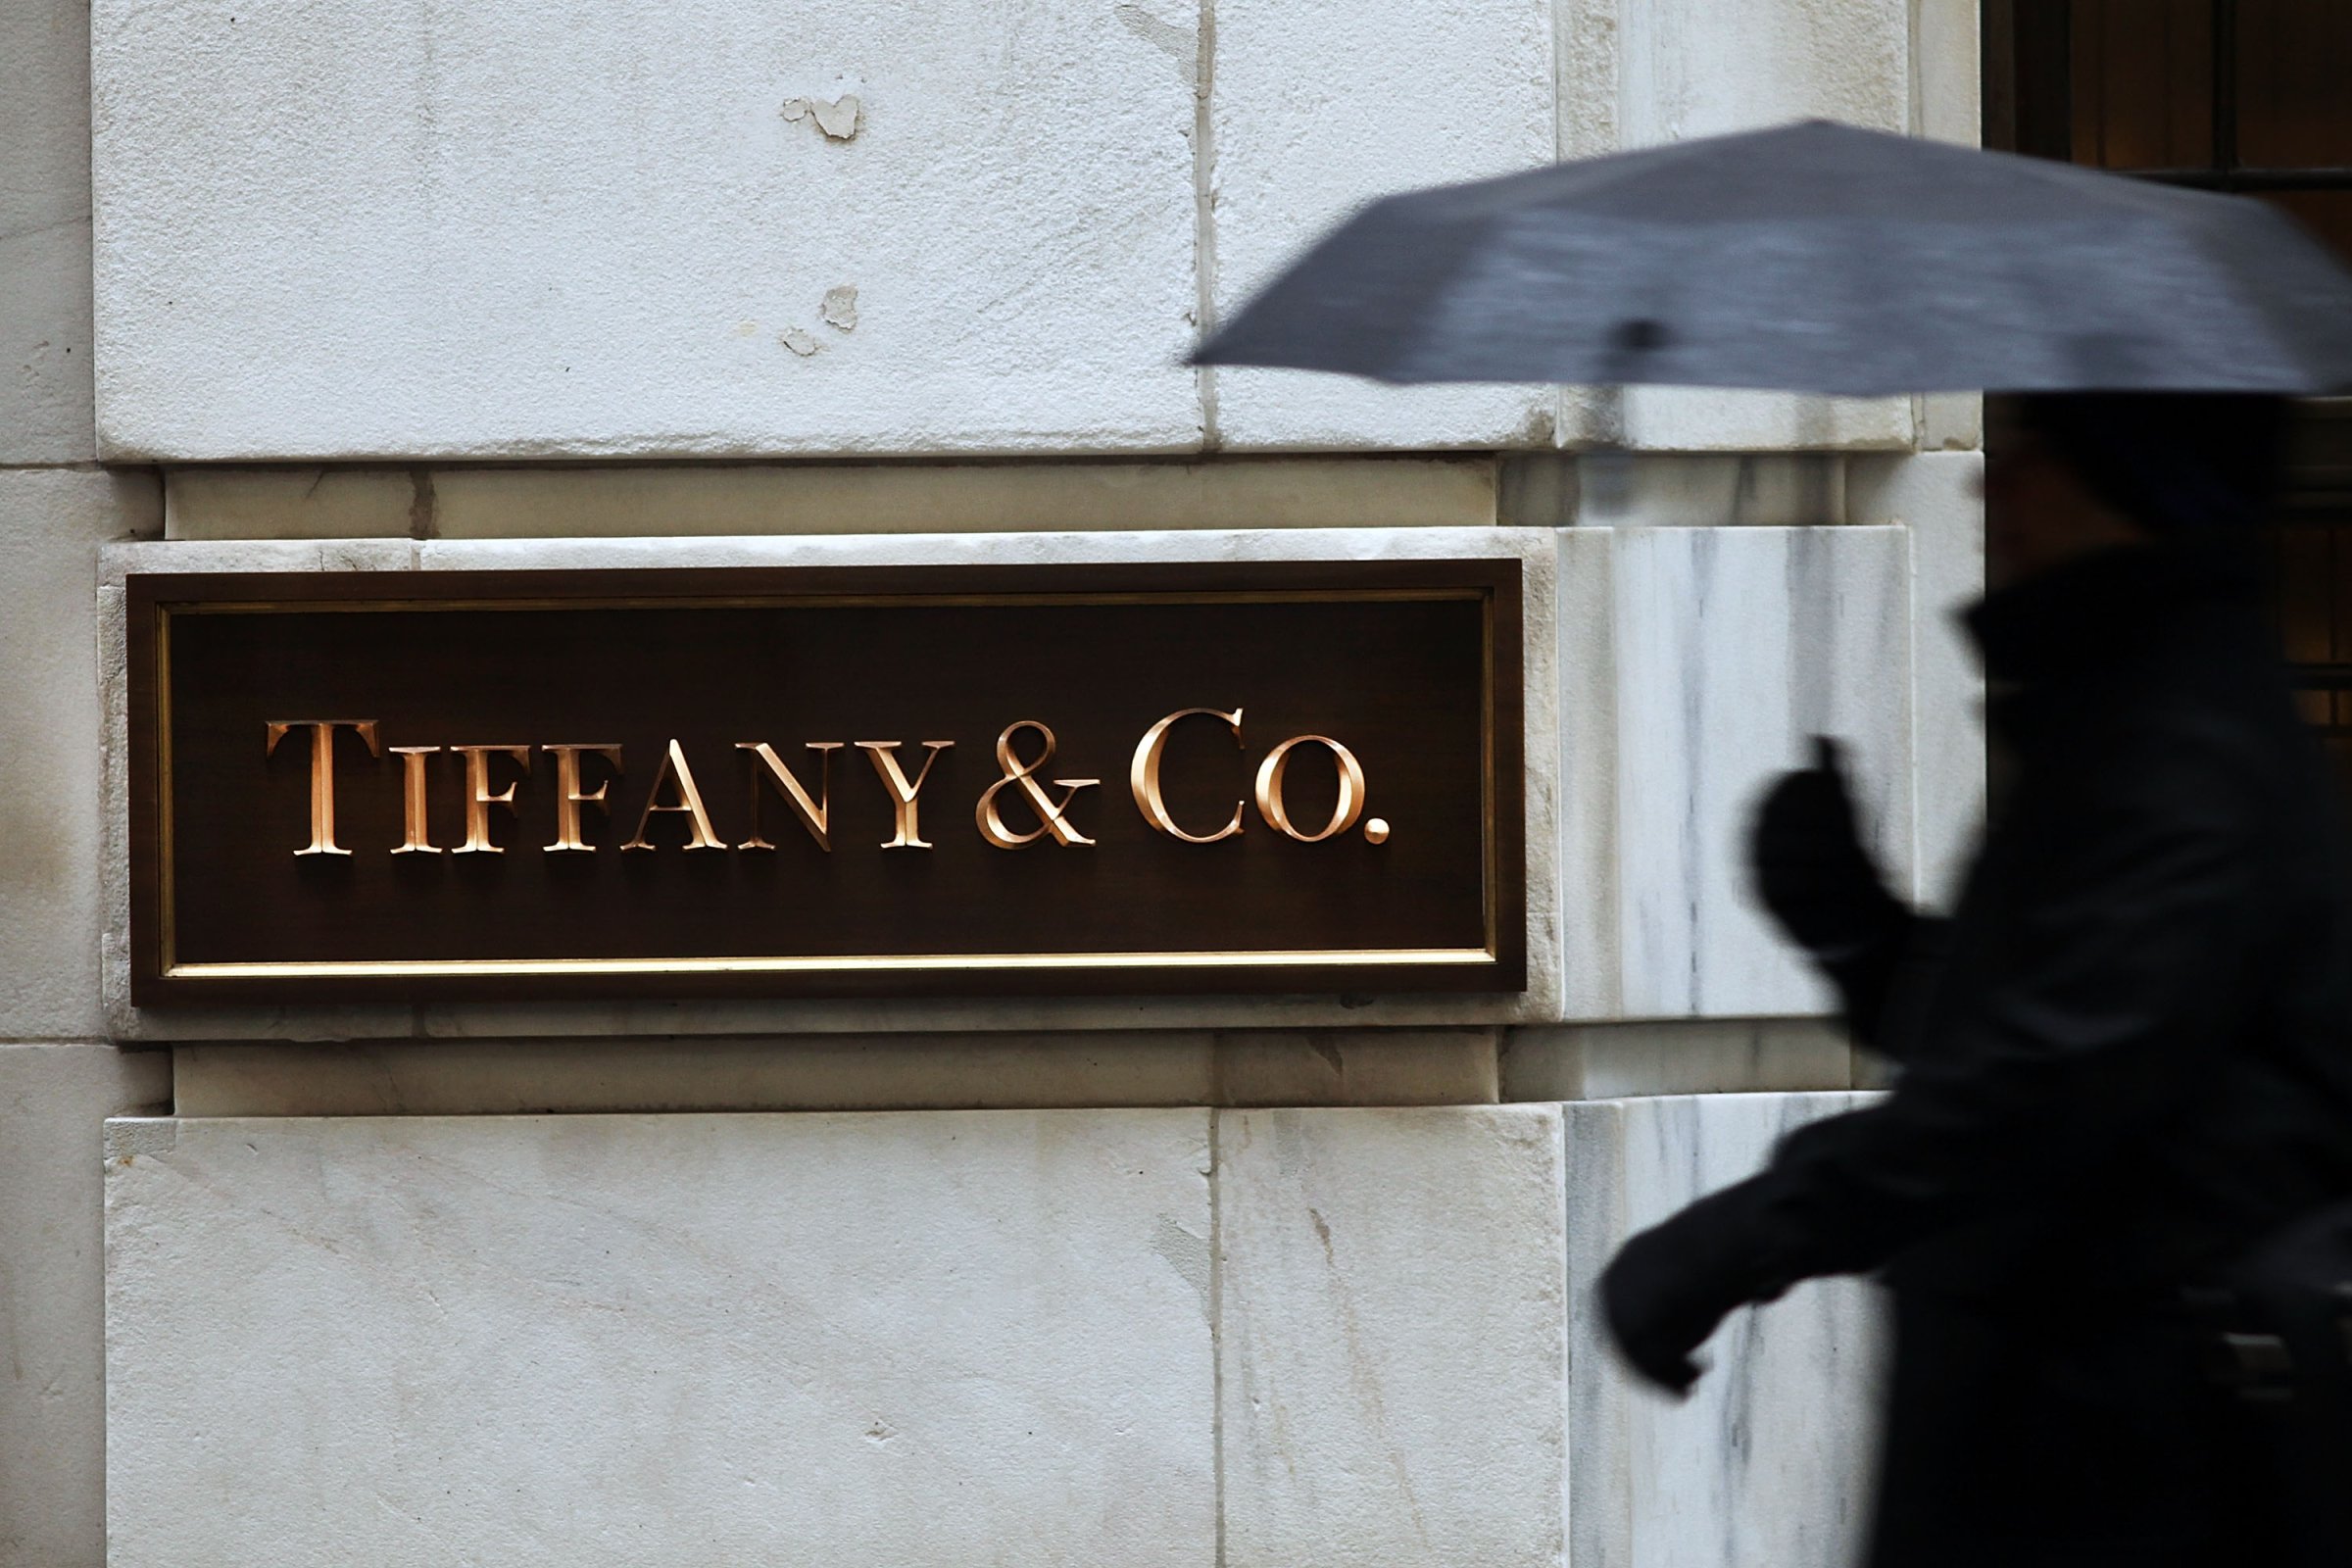 A person walks past a Tiffany & Co. store on Jan. 12, 2015 in New York City.